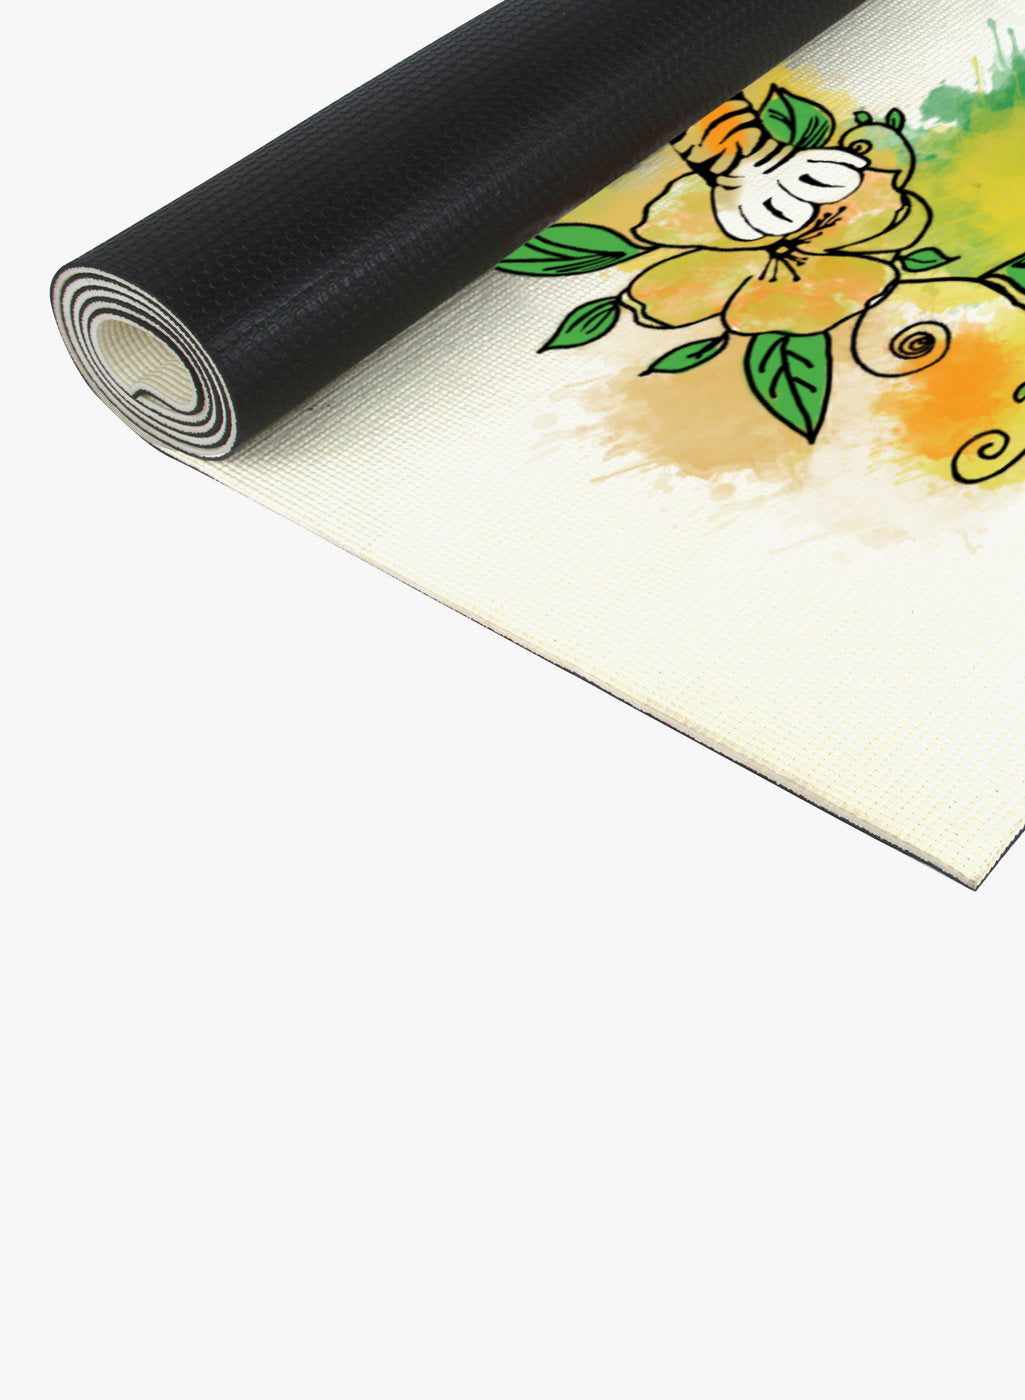 Embrace the strength of the tiger with our Shakti Warrior Tiger Design Yoga Mat. Featuring powerful imagery, excellent grip, 5mm joint cushioning, and non-slip performance, this mat is a gateway to feel the victorious spirit in every yoga pose. Crafted from eco-friendly PVC for both regular and hot yoga.